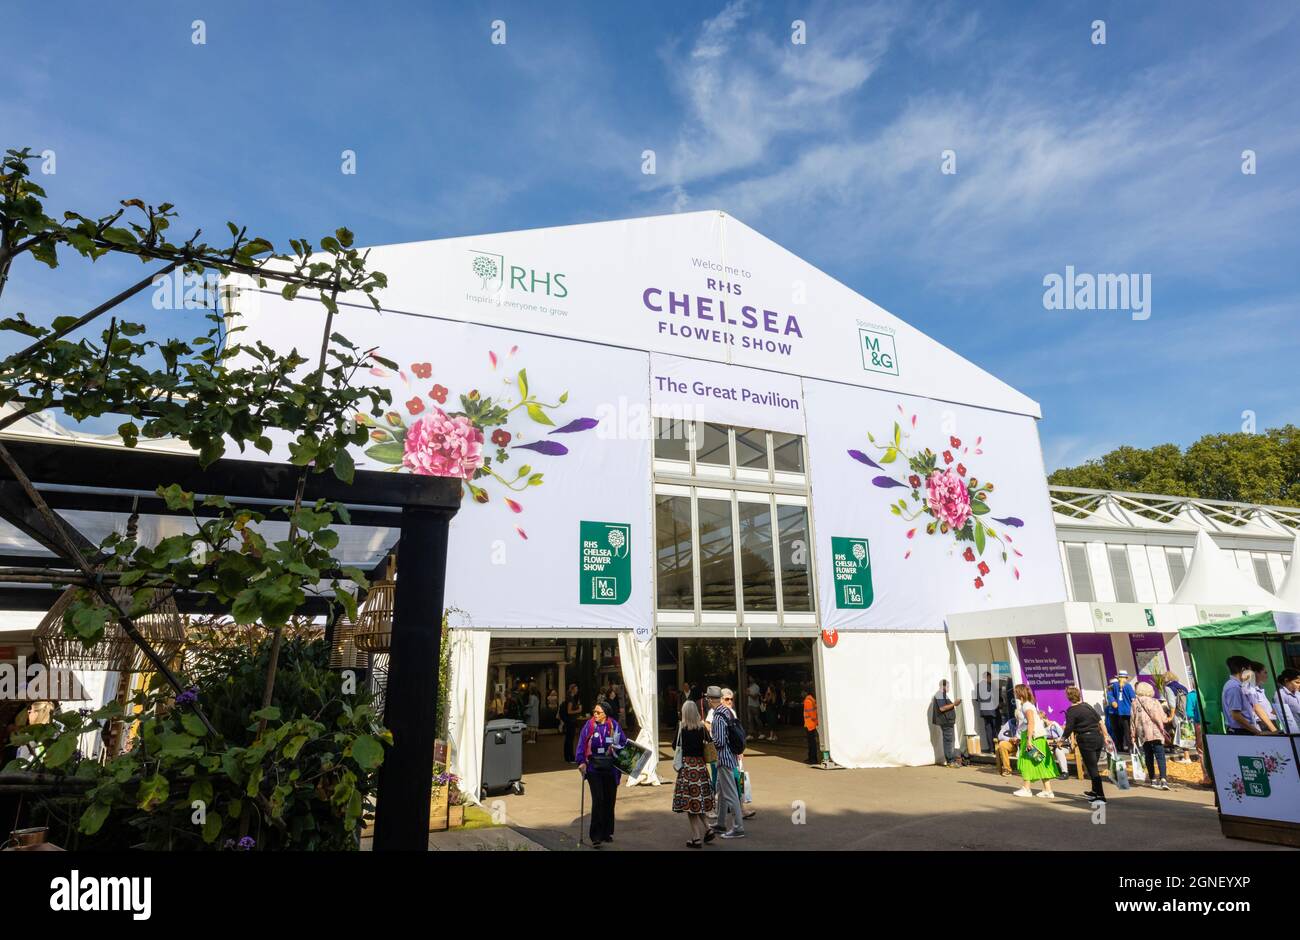 Entrance to The Great Pavilion at the RHS Chelsea Flower Show, held in the grounds of the Royal Hospital Chelsea, London SW3 in September 2021 Stock Photo